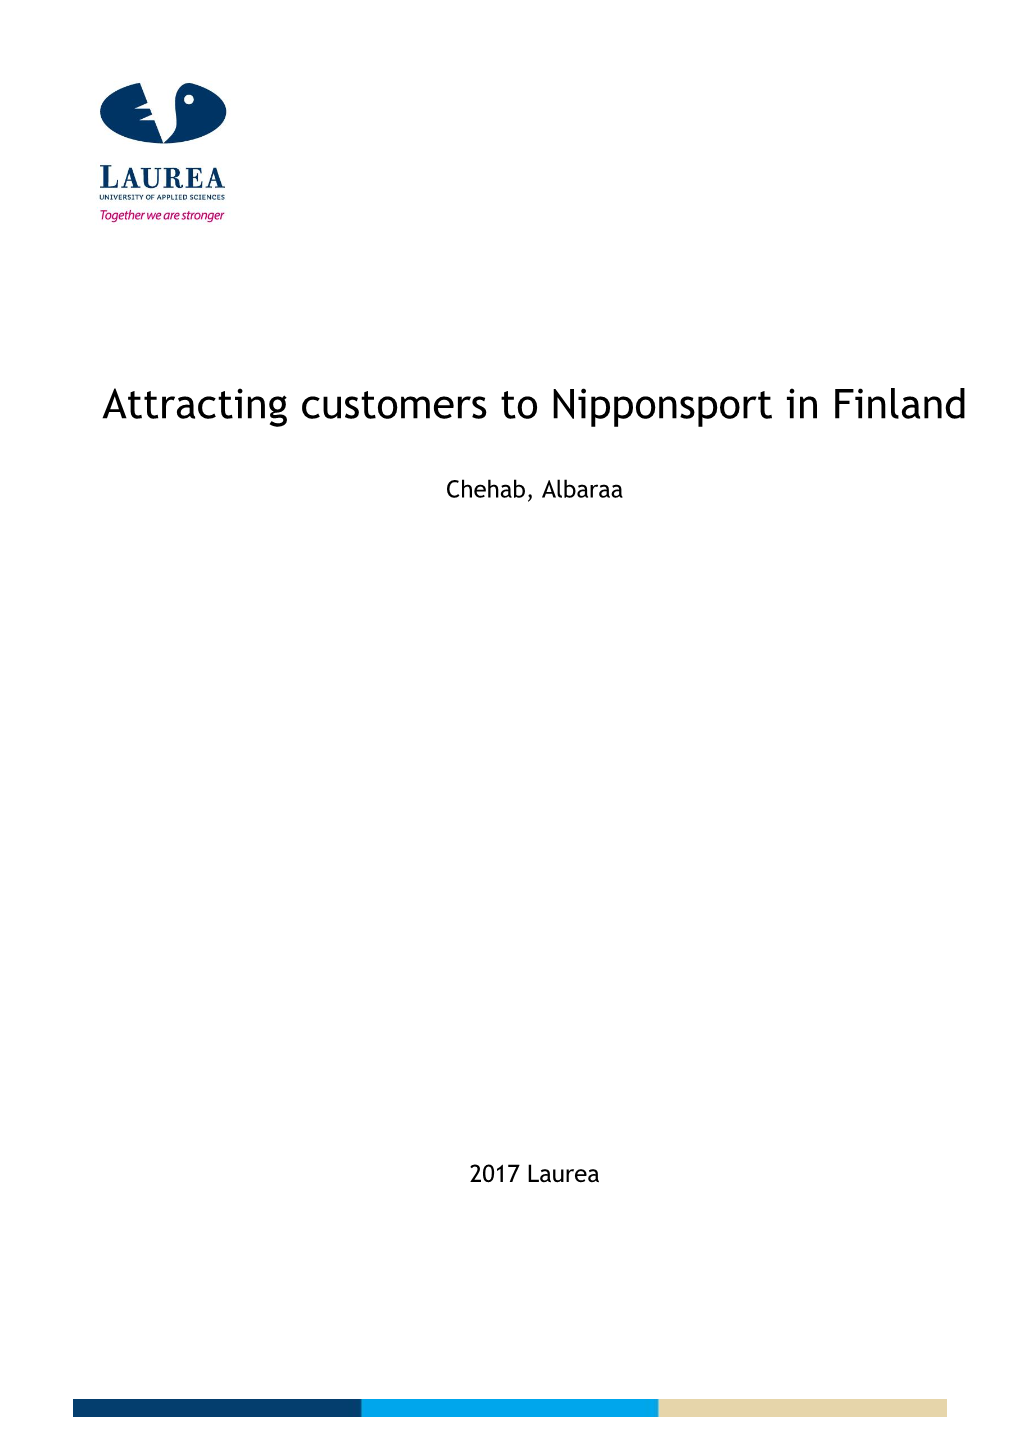 Attracting Customers to Nipponsport in Finland